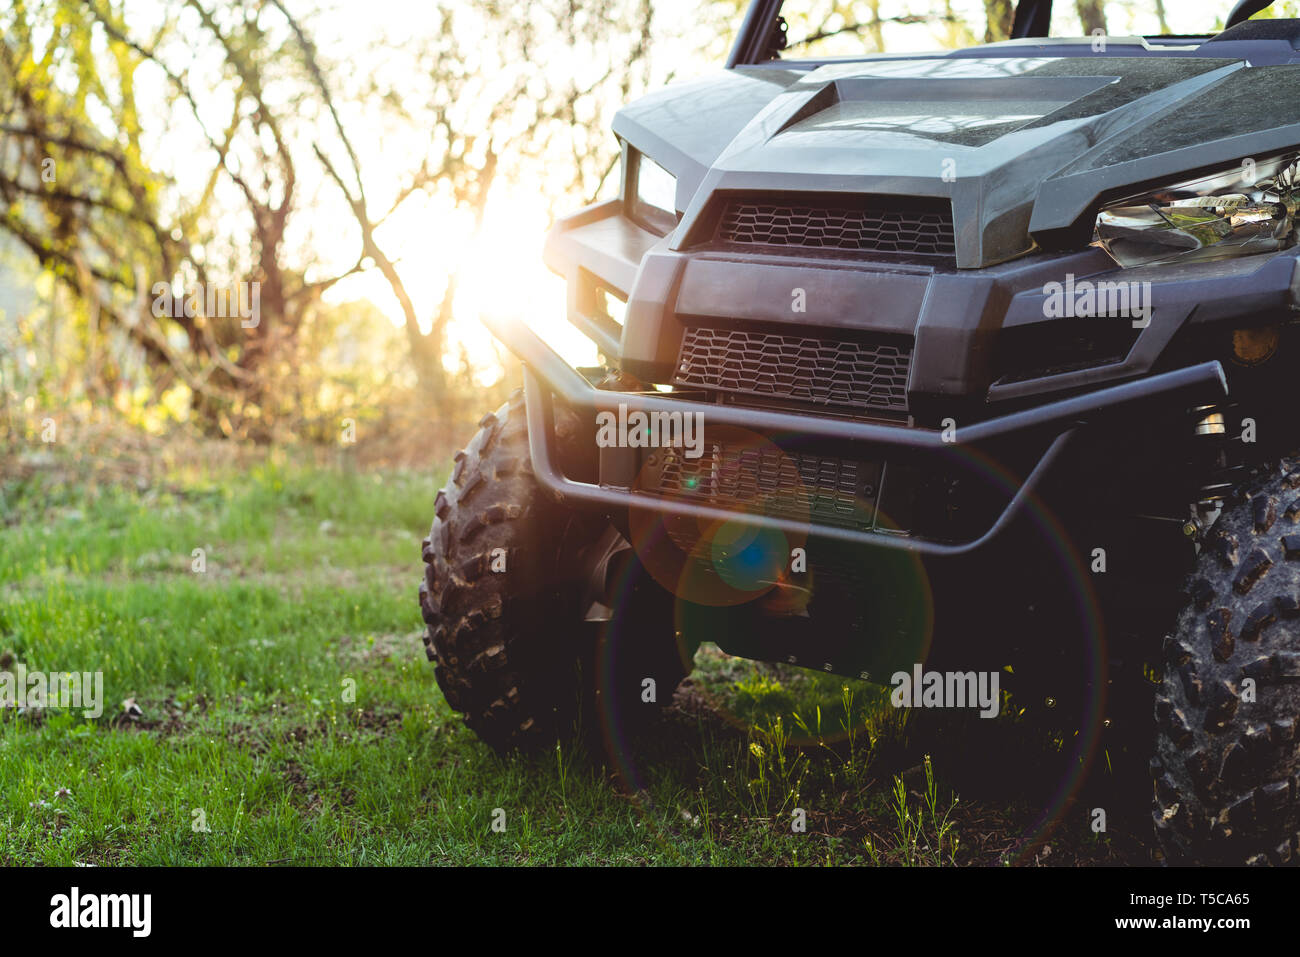 ATV or UTV 4x4 vehicle off-road recreation in green forest area at sunset Stock Photo